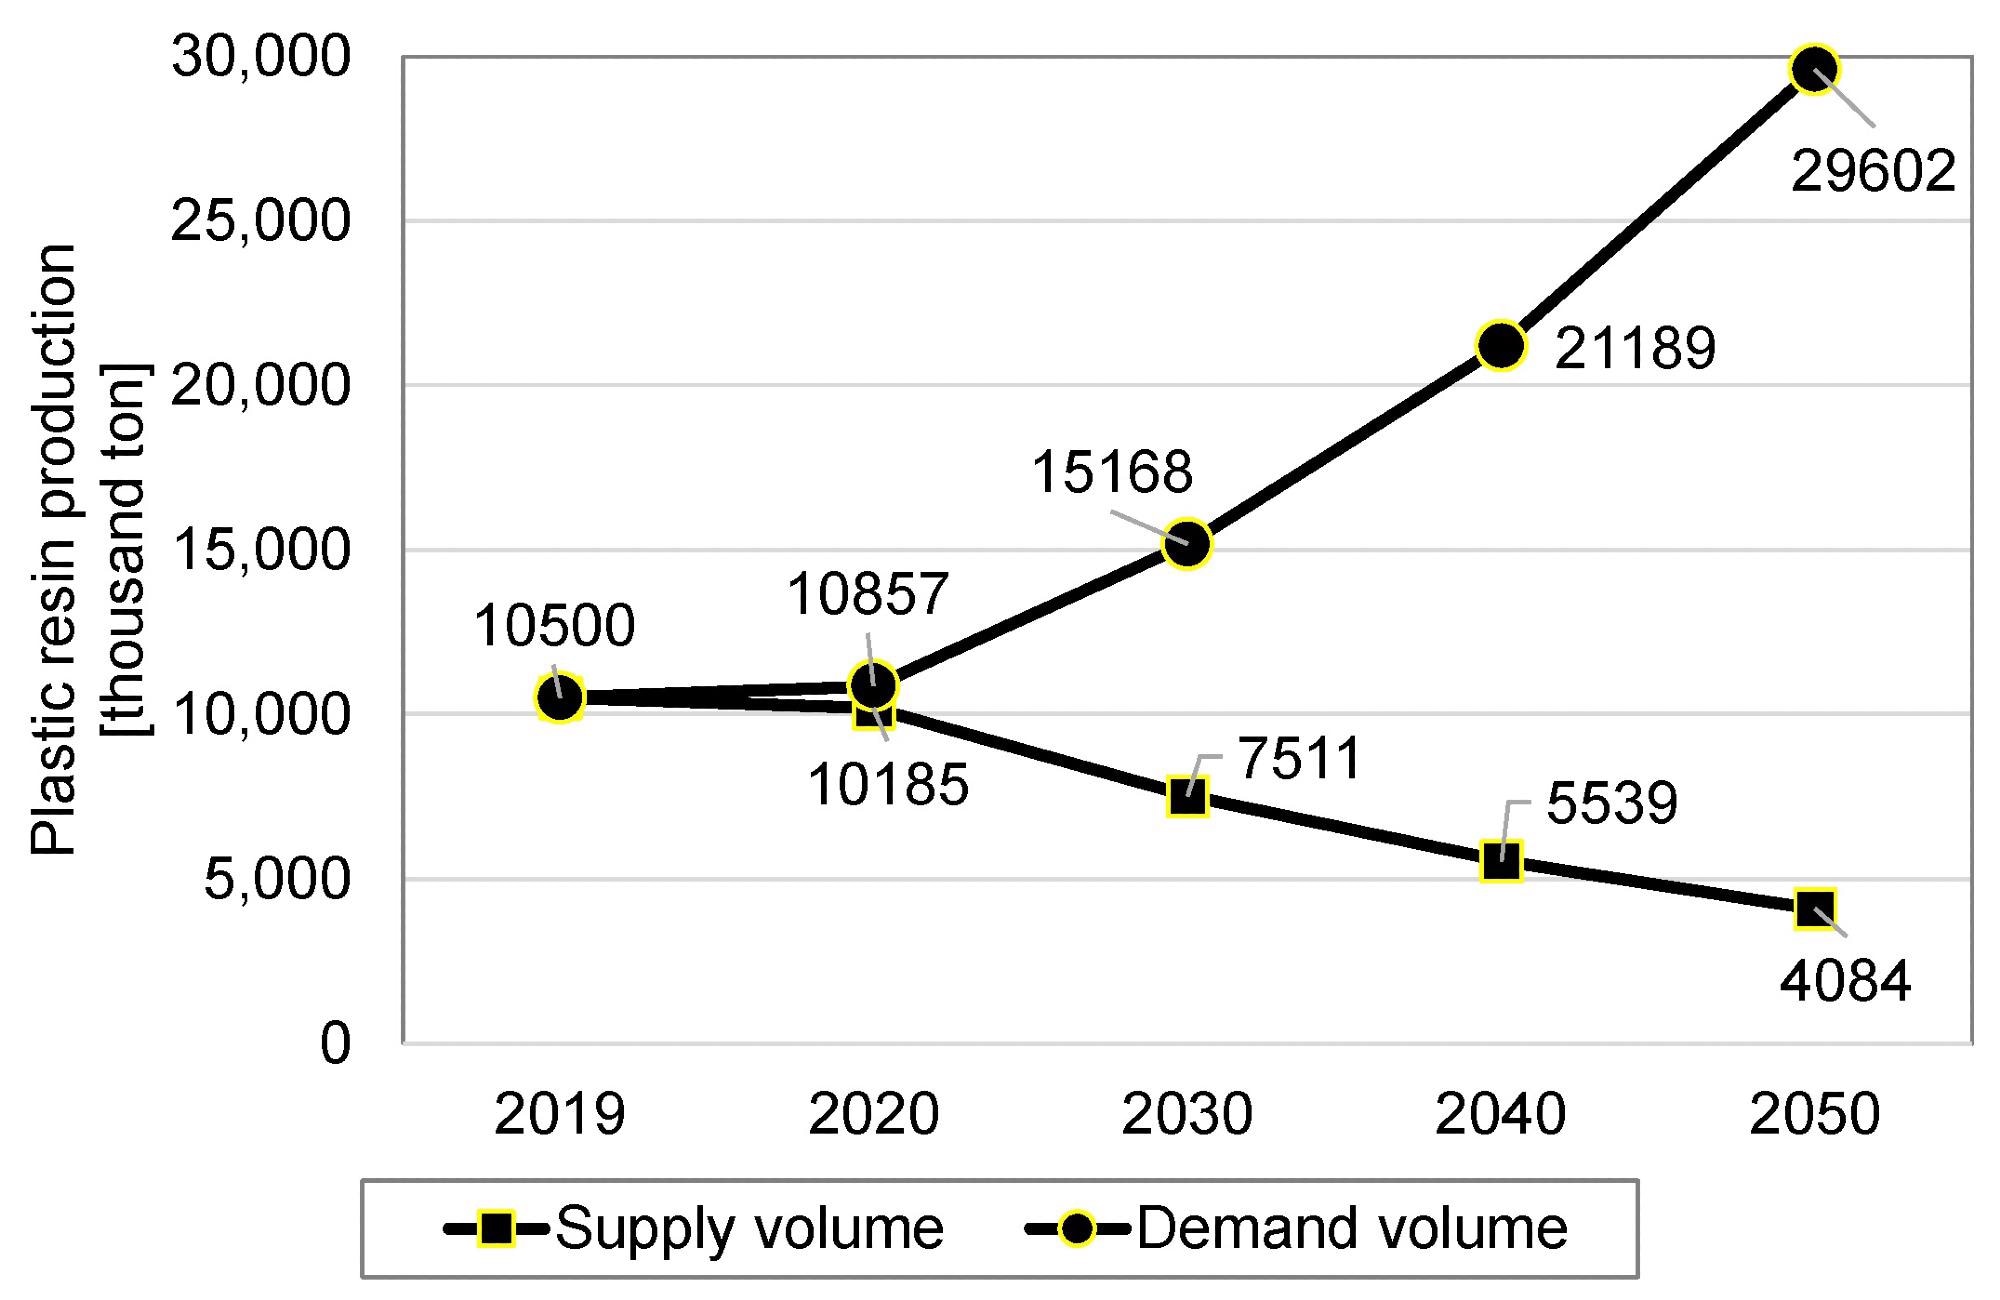 Outlook of supply and demand volume of plastic resin production.